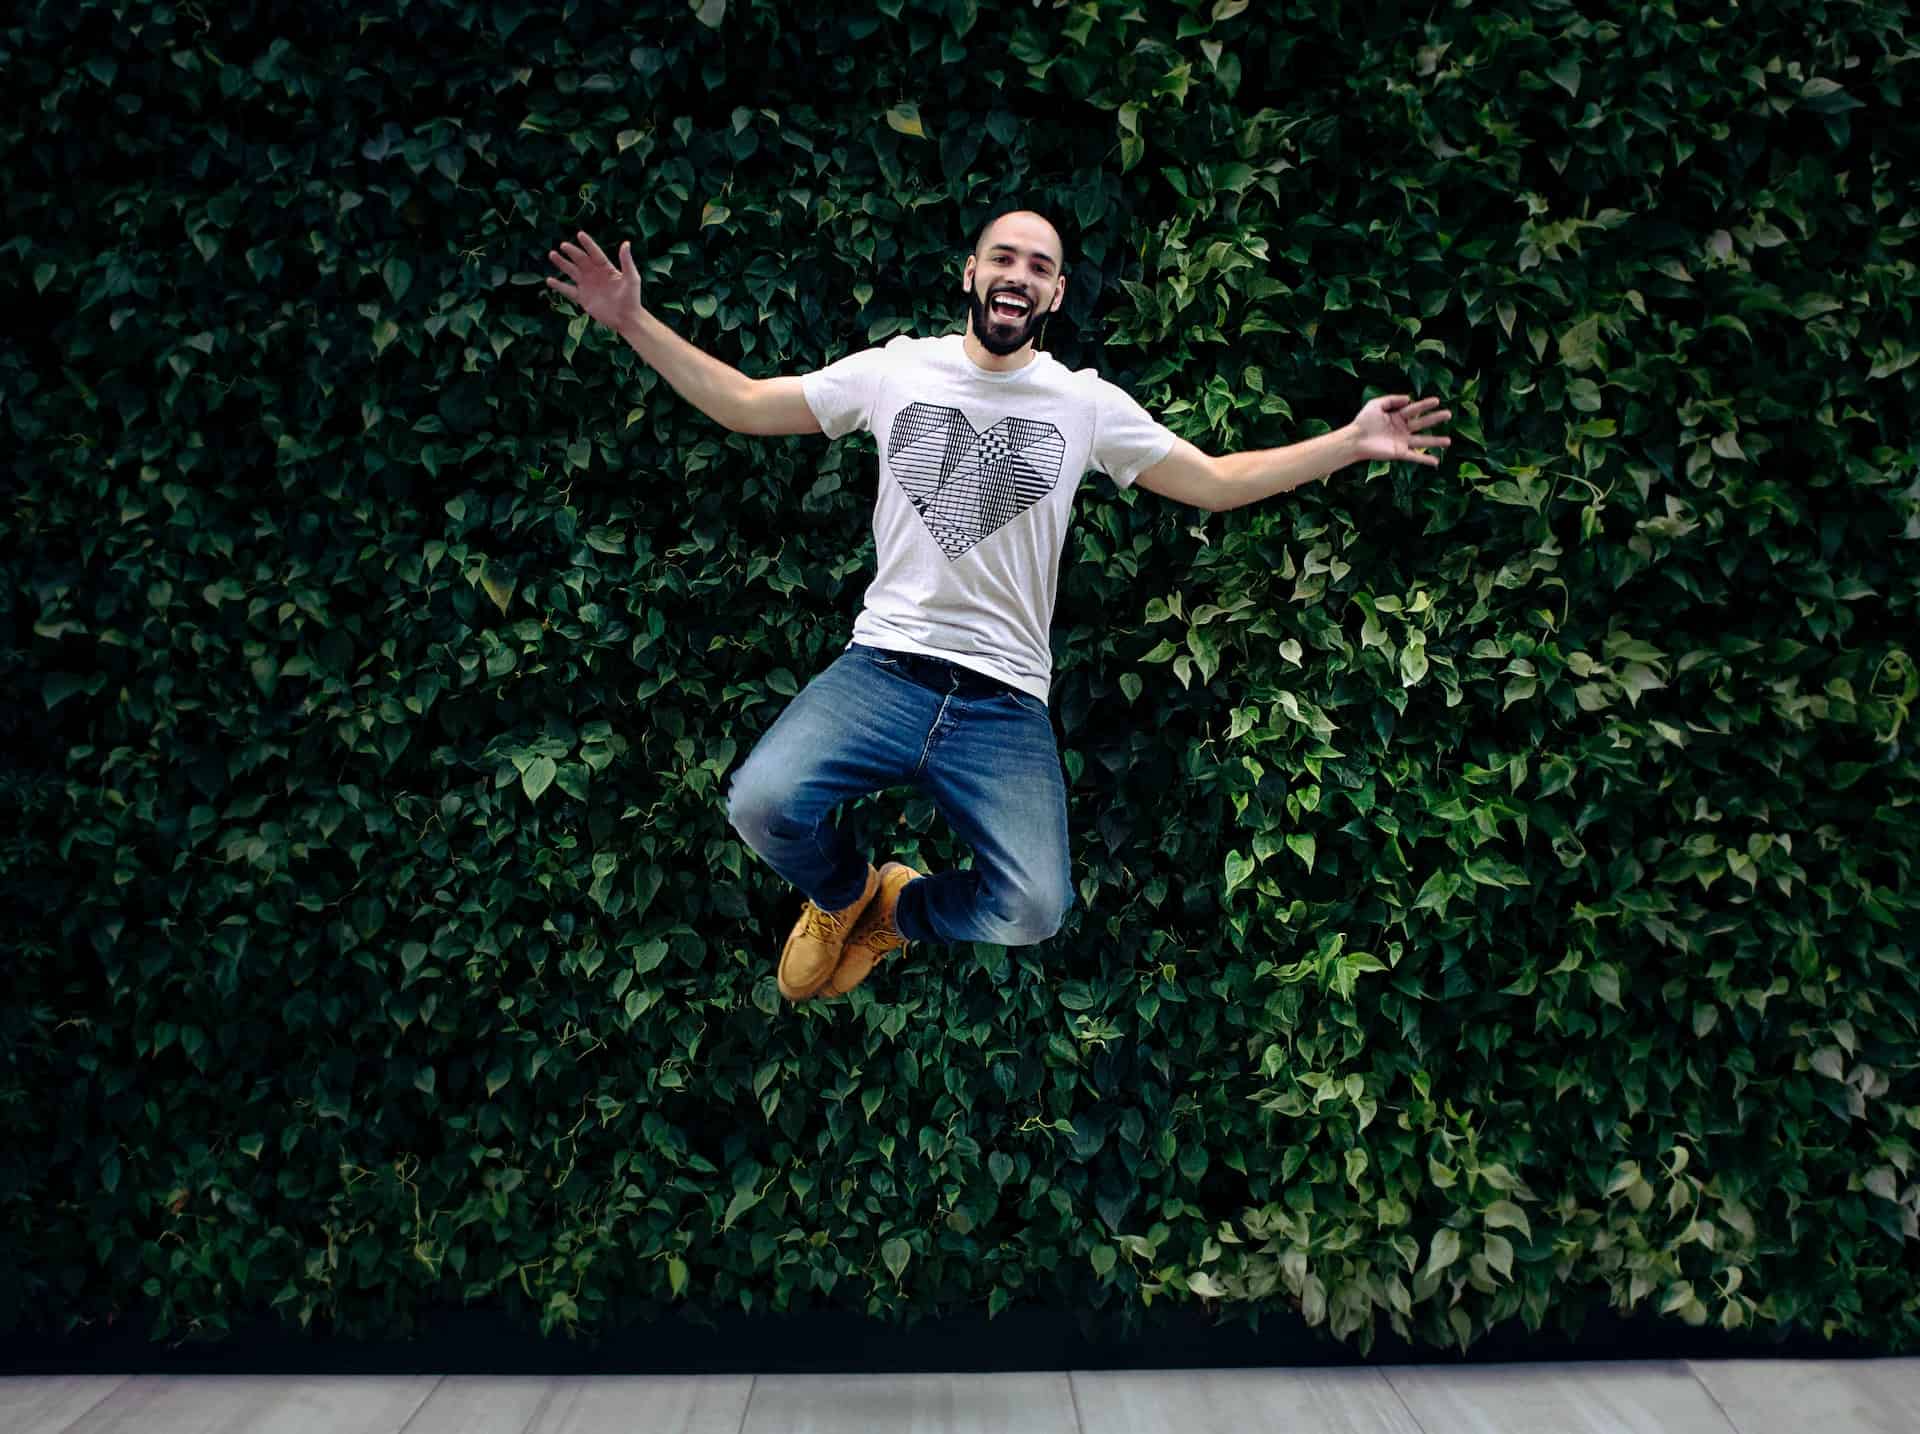 A man full of energy and jumping in front of leaves